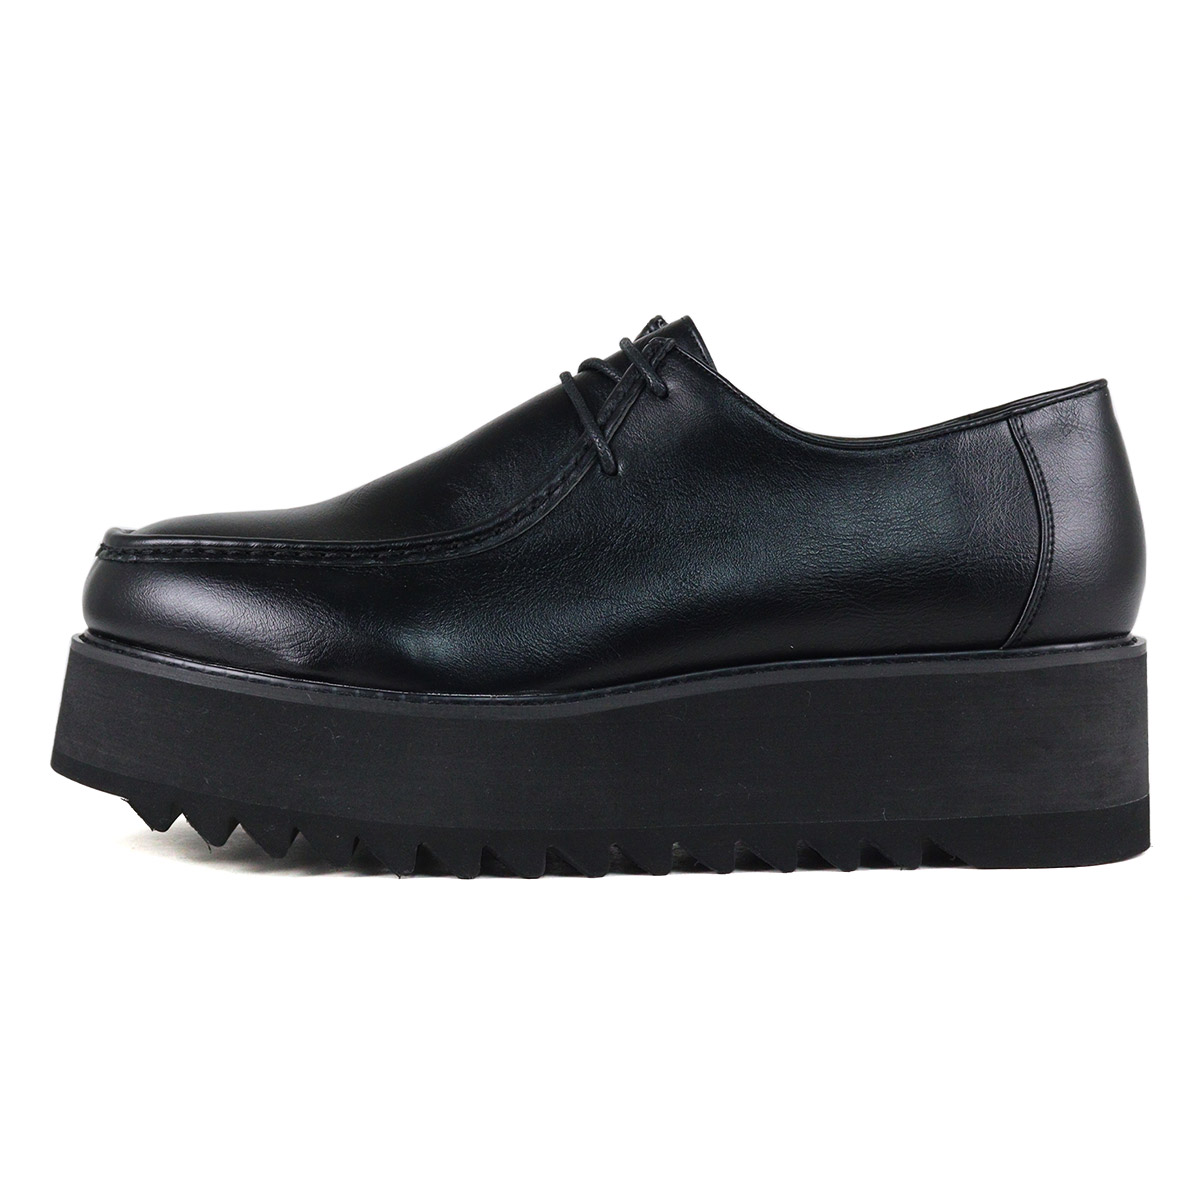  leather shoes men's casual black thickness bottom race up tyrolean light ..... leather synthetic leather gentleman 3E 25-27cm No.1733 Rav Hunter 